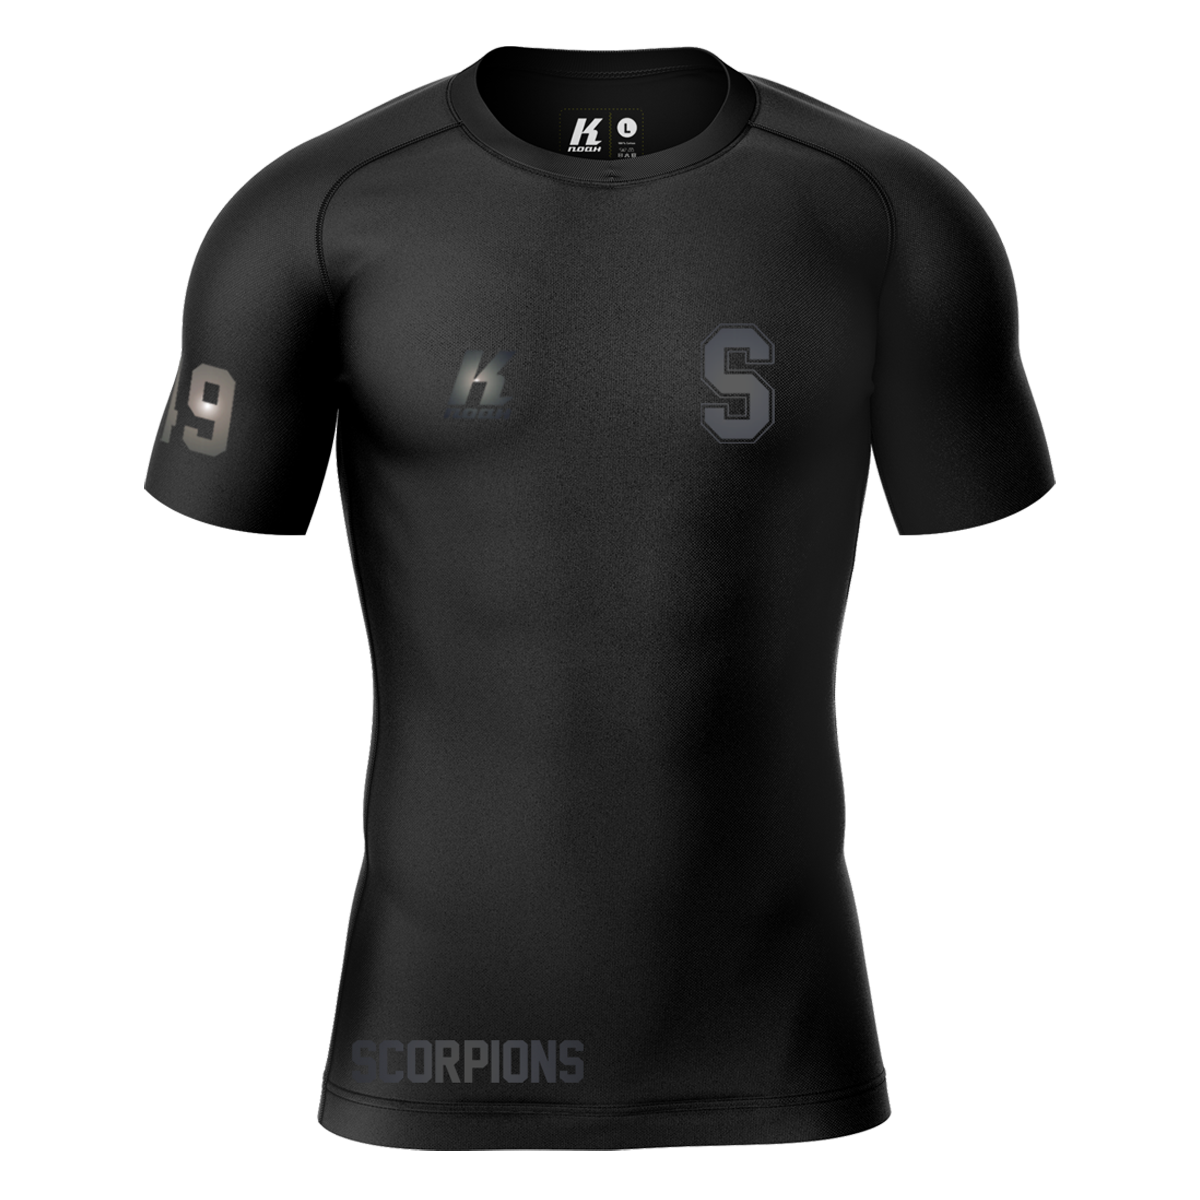 Scorpions "Blackline" K.Tech Compression Shortsleeve Shirt with Playernumber/Initials